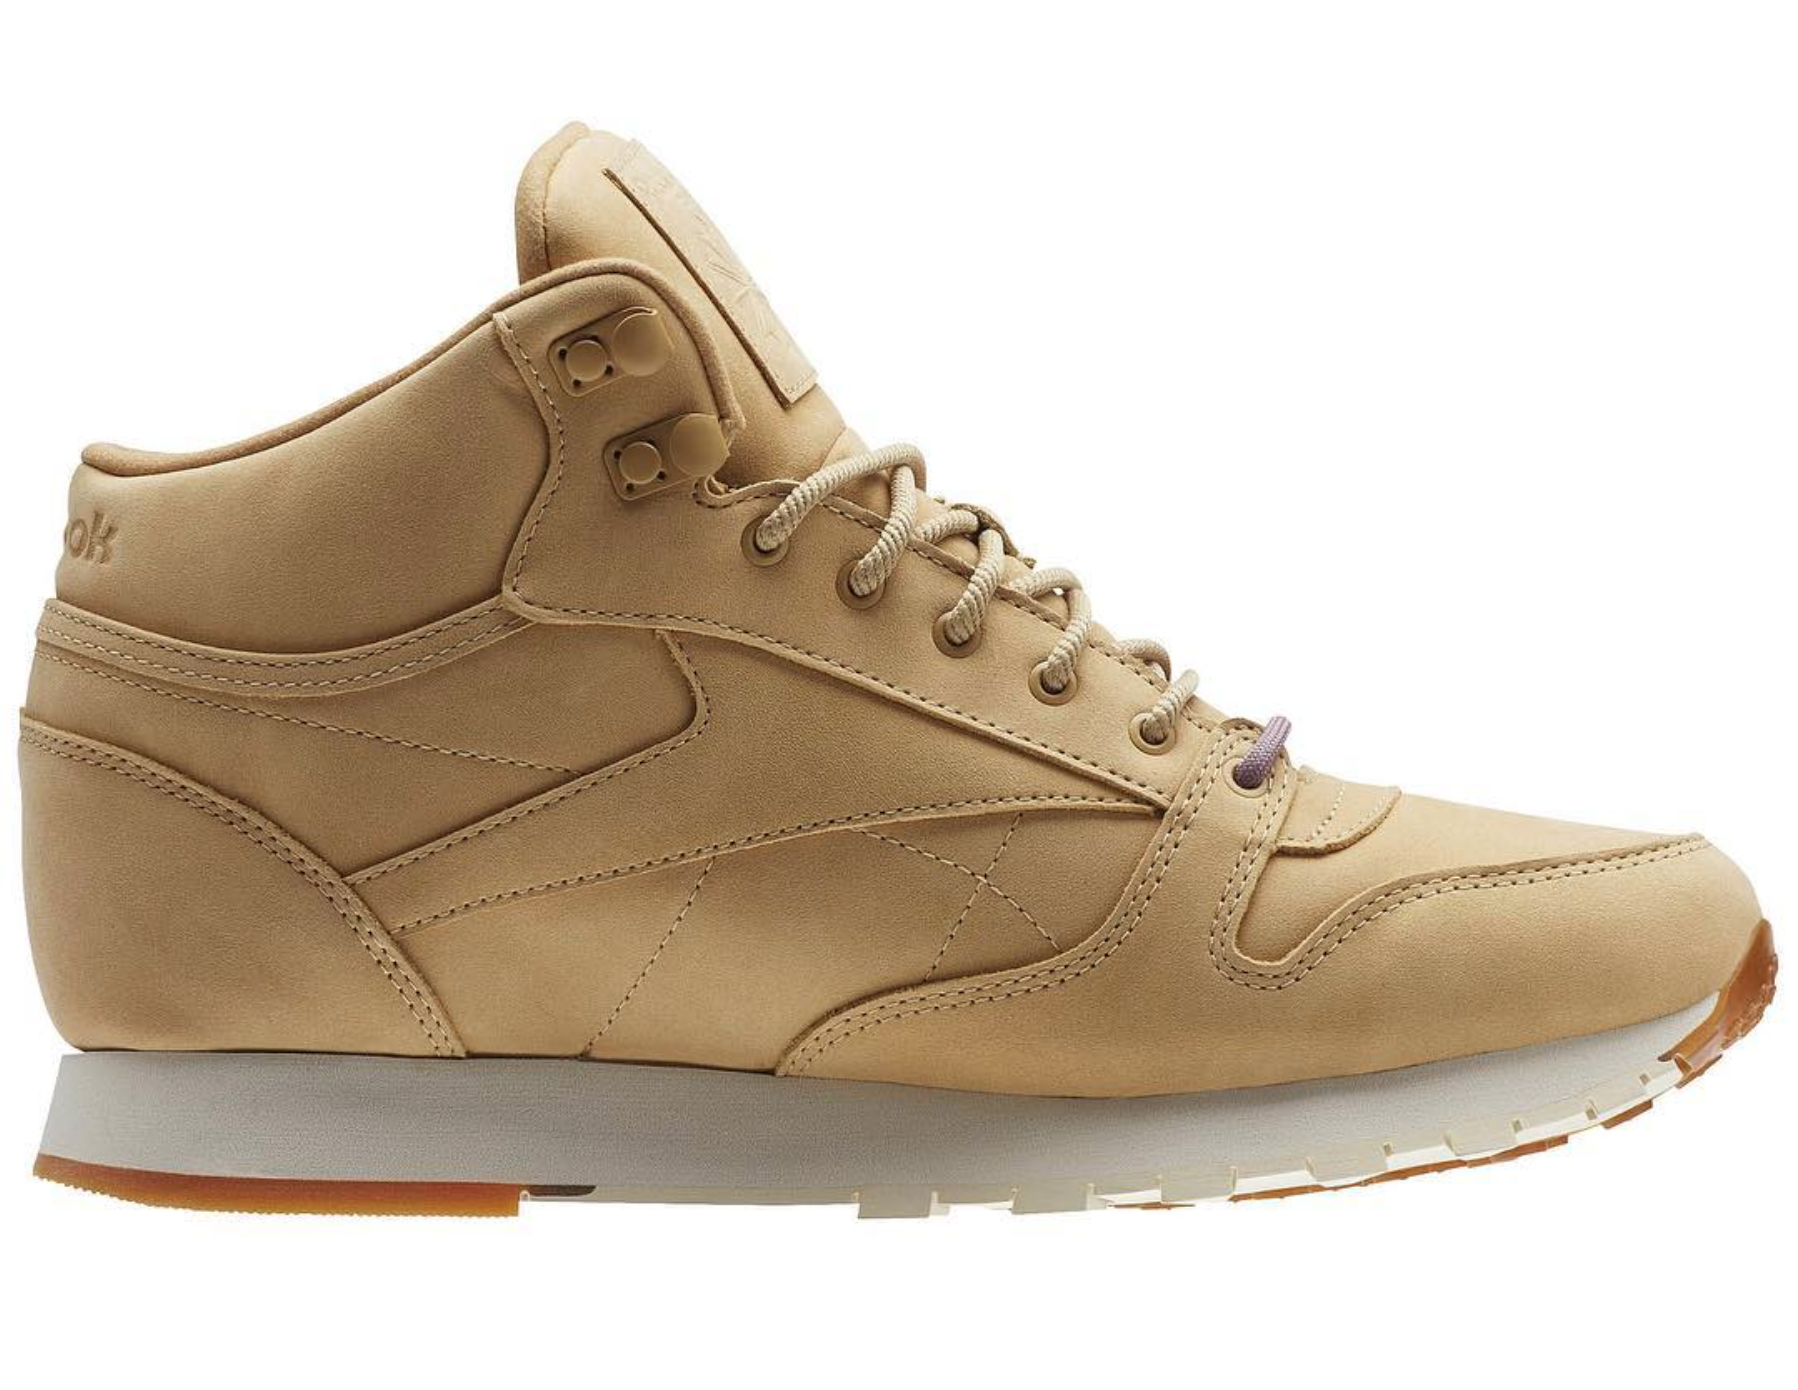 The Reebok Classic Leather Mid is Winter-Ready with GORE-TEX and Thinsulate  - WearTesters